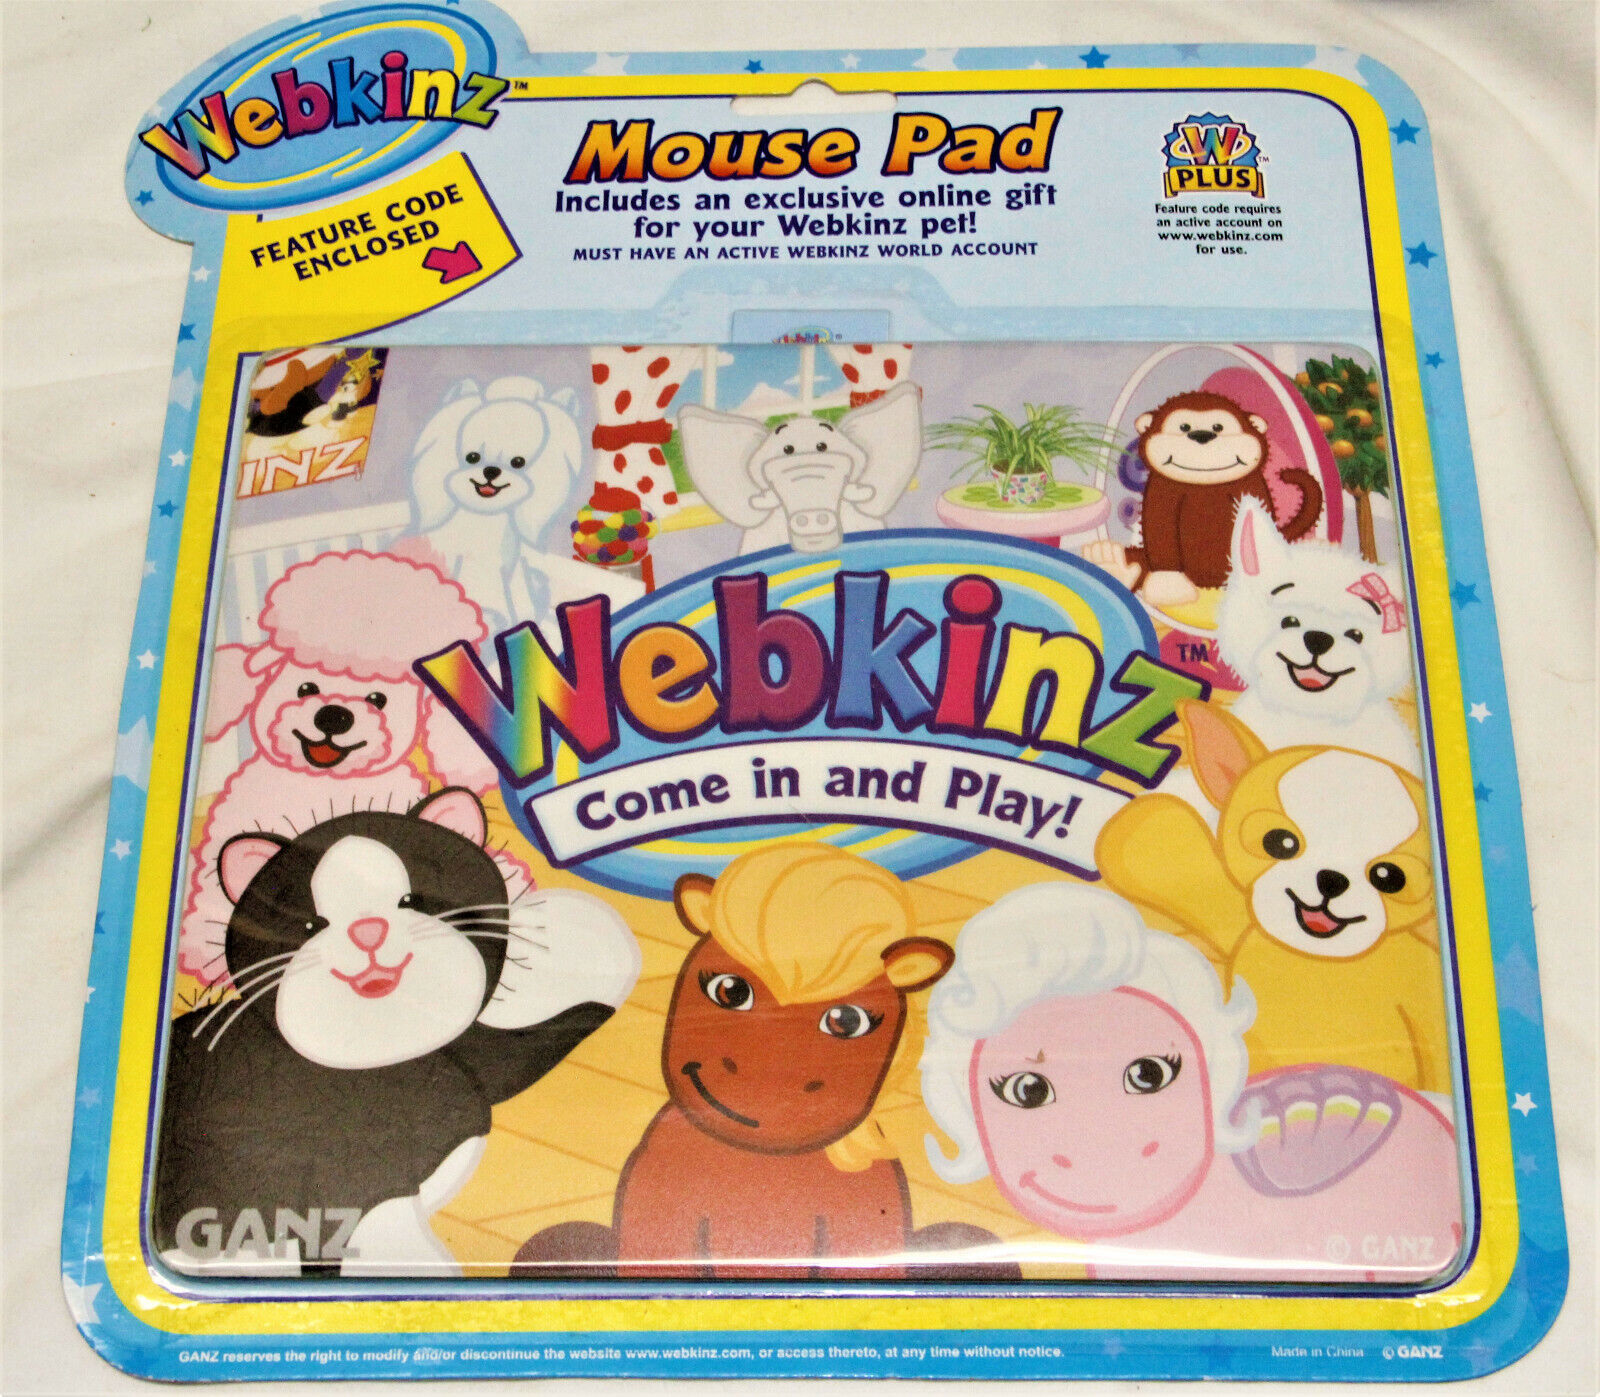 Webkinz Mouse Pad Come in & Play w/ Code Unopened New Package  - FREE SHIPPING